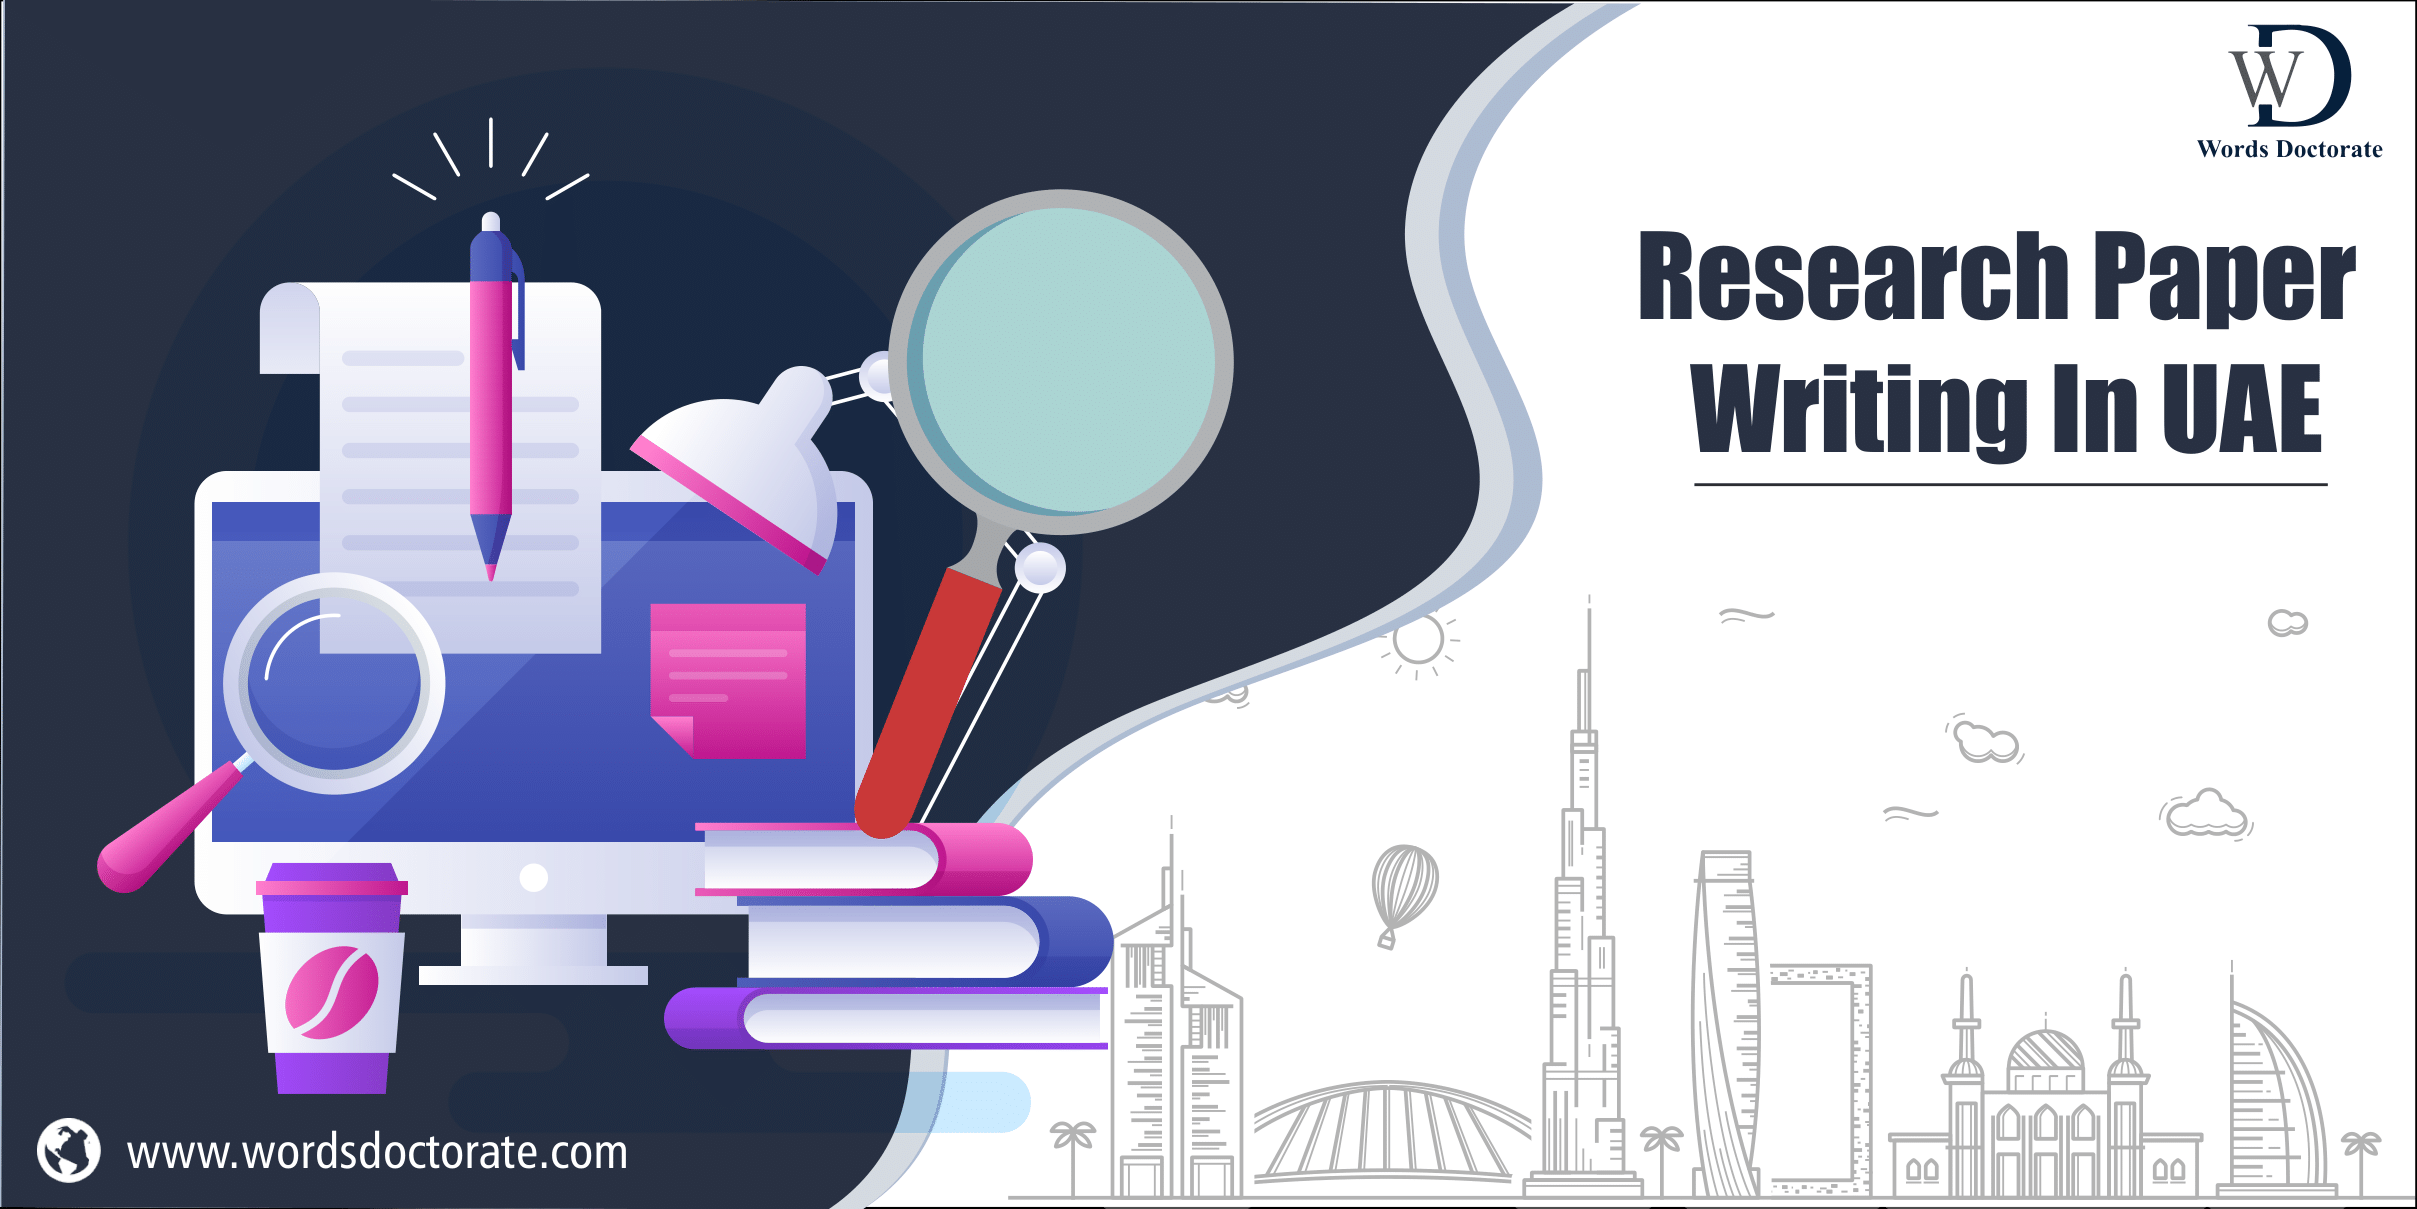 Research Paper Writing In UAE